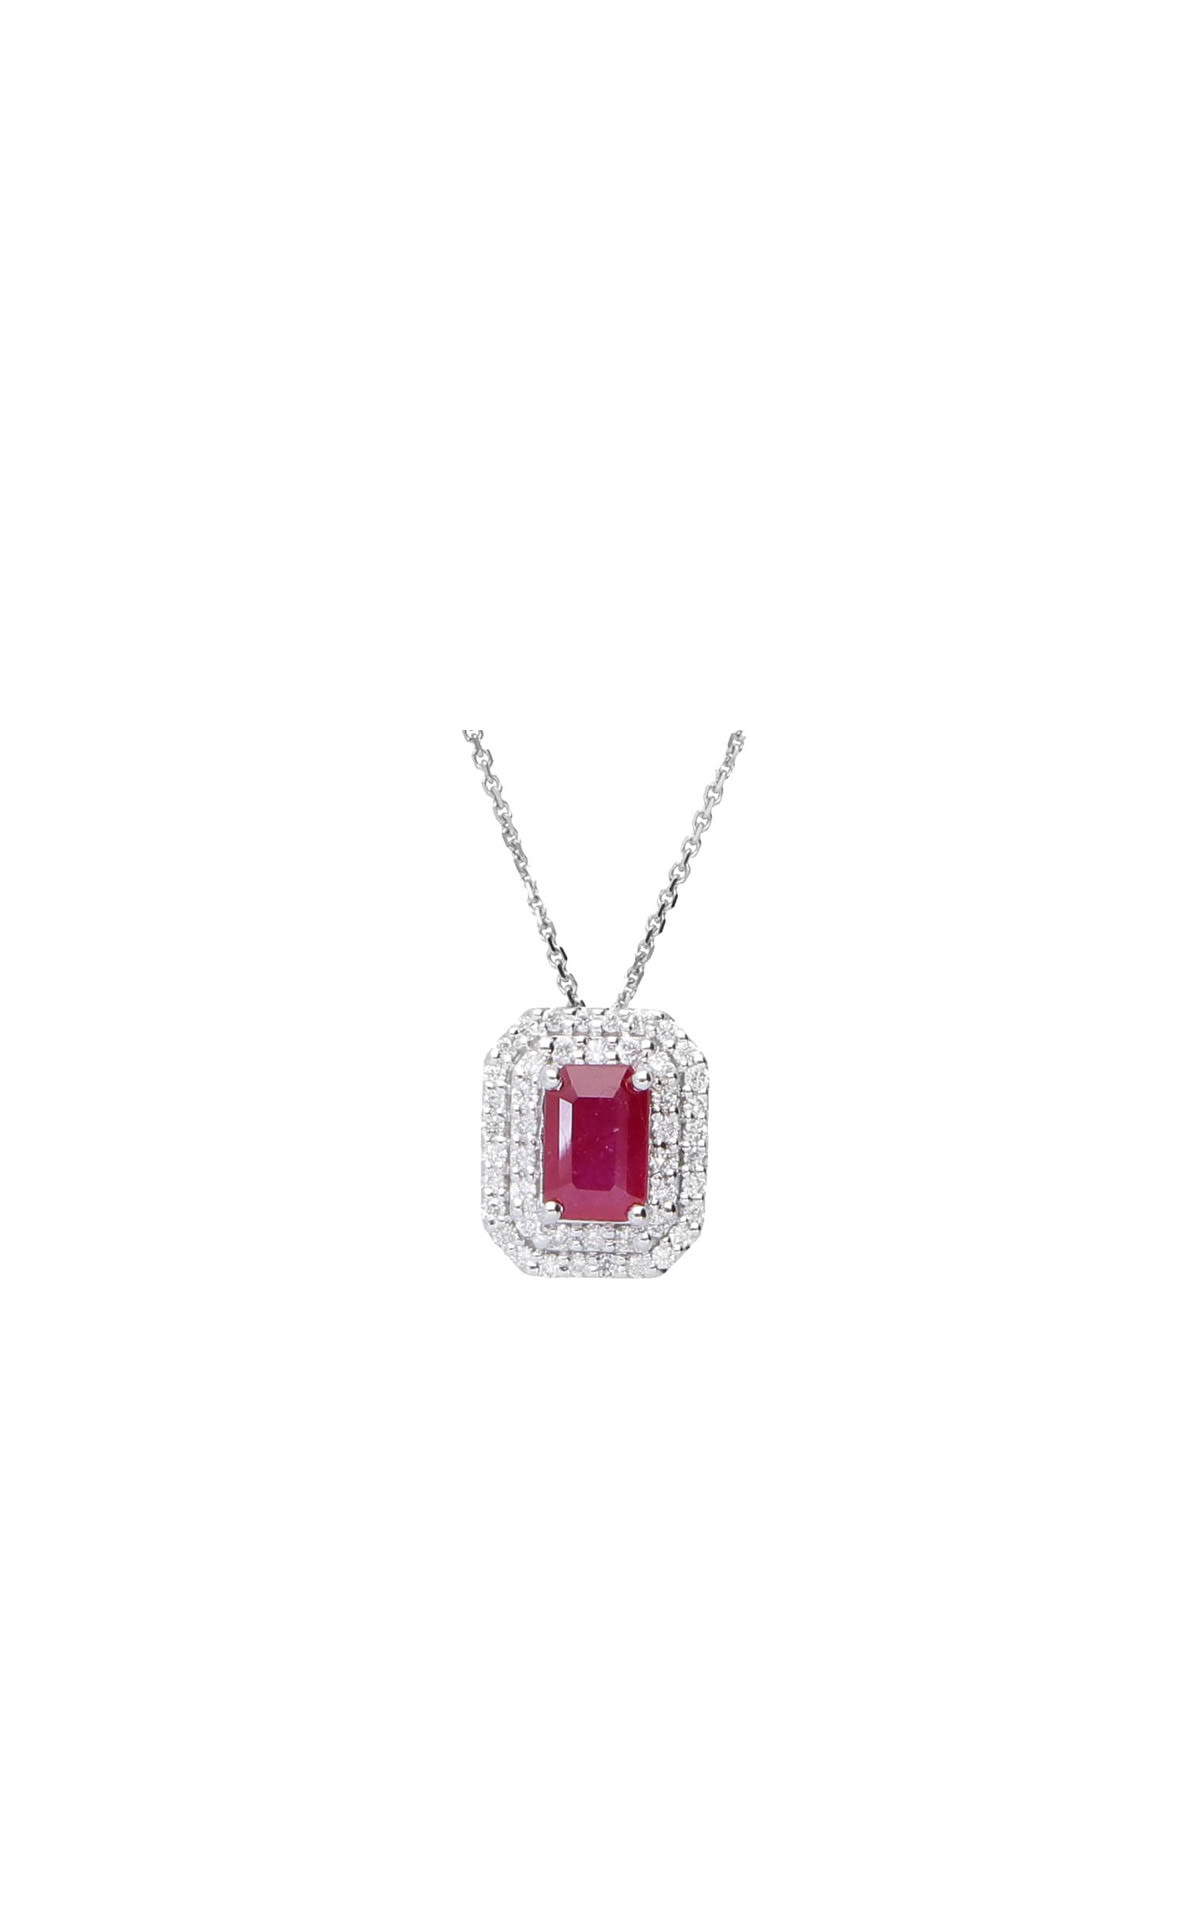 Alfieri & St John necklace in white gold with a diamond and octagonal ruby pendant